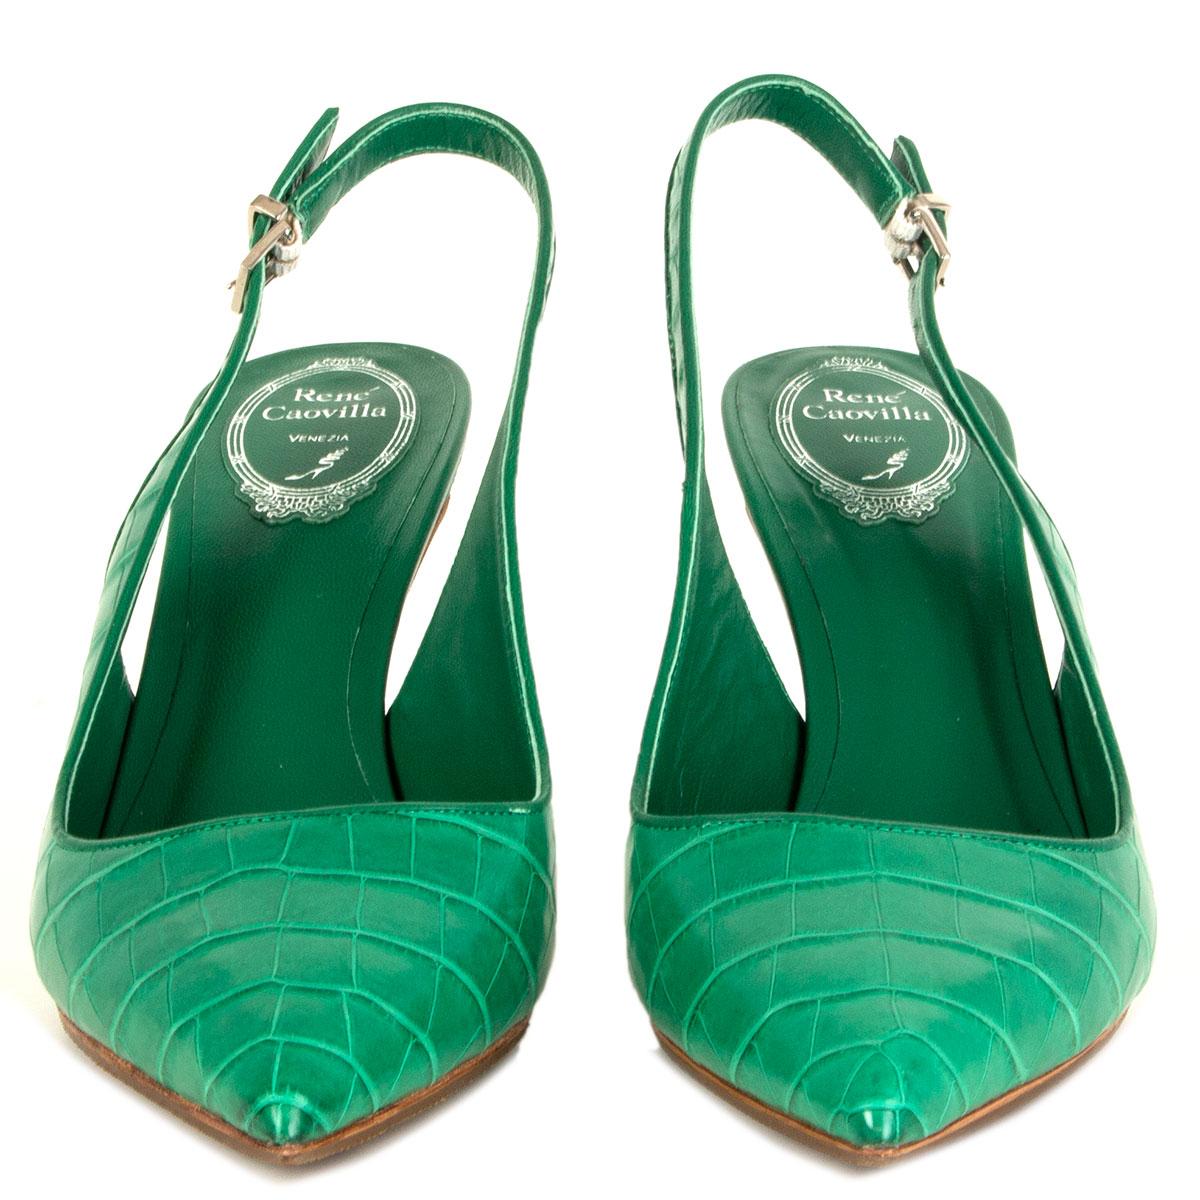 100% authentic René Caovilla NADINE slingbacks in emerald green crocodile leather. Have been worn once and are in virtually new condition. Rubber sole has been added. 

Measurements
Imprinted Size	41
Shoe Size	41
Inside Sole	27cm (10.5in)
Width	8cm